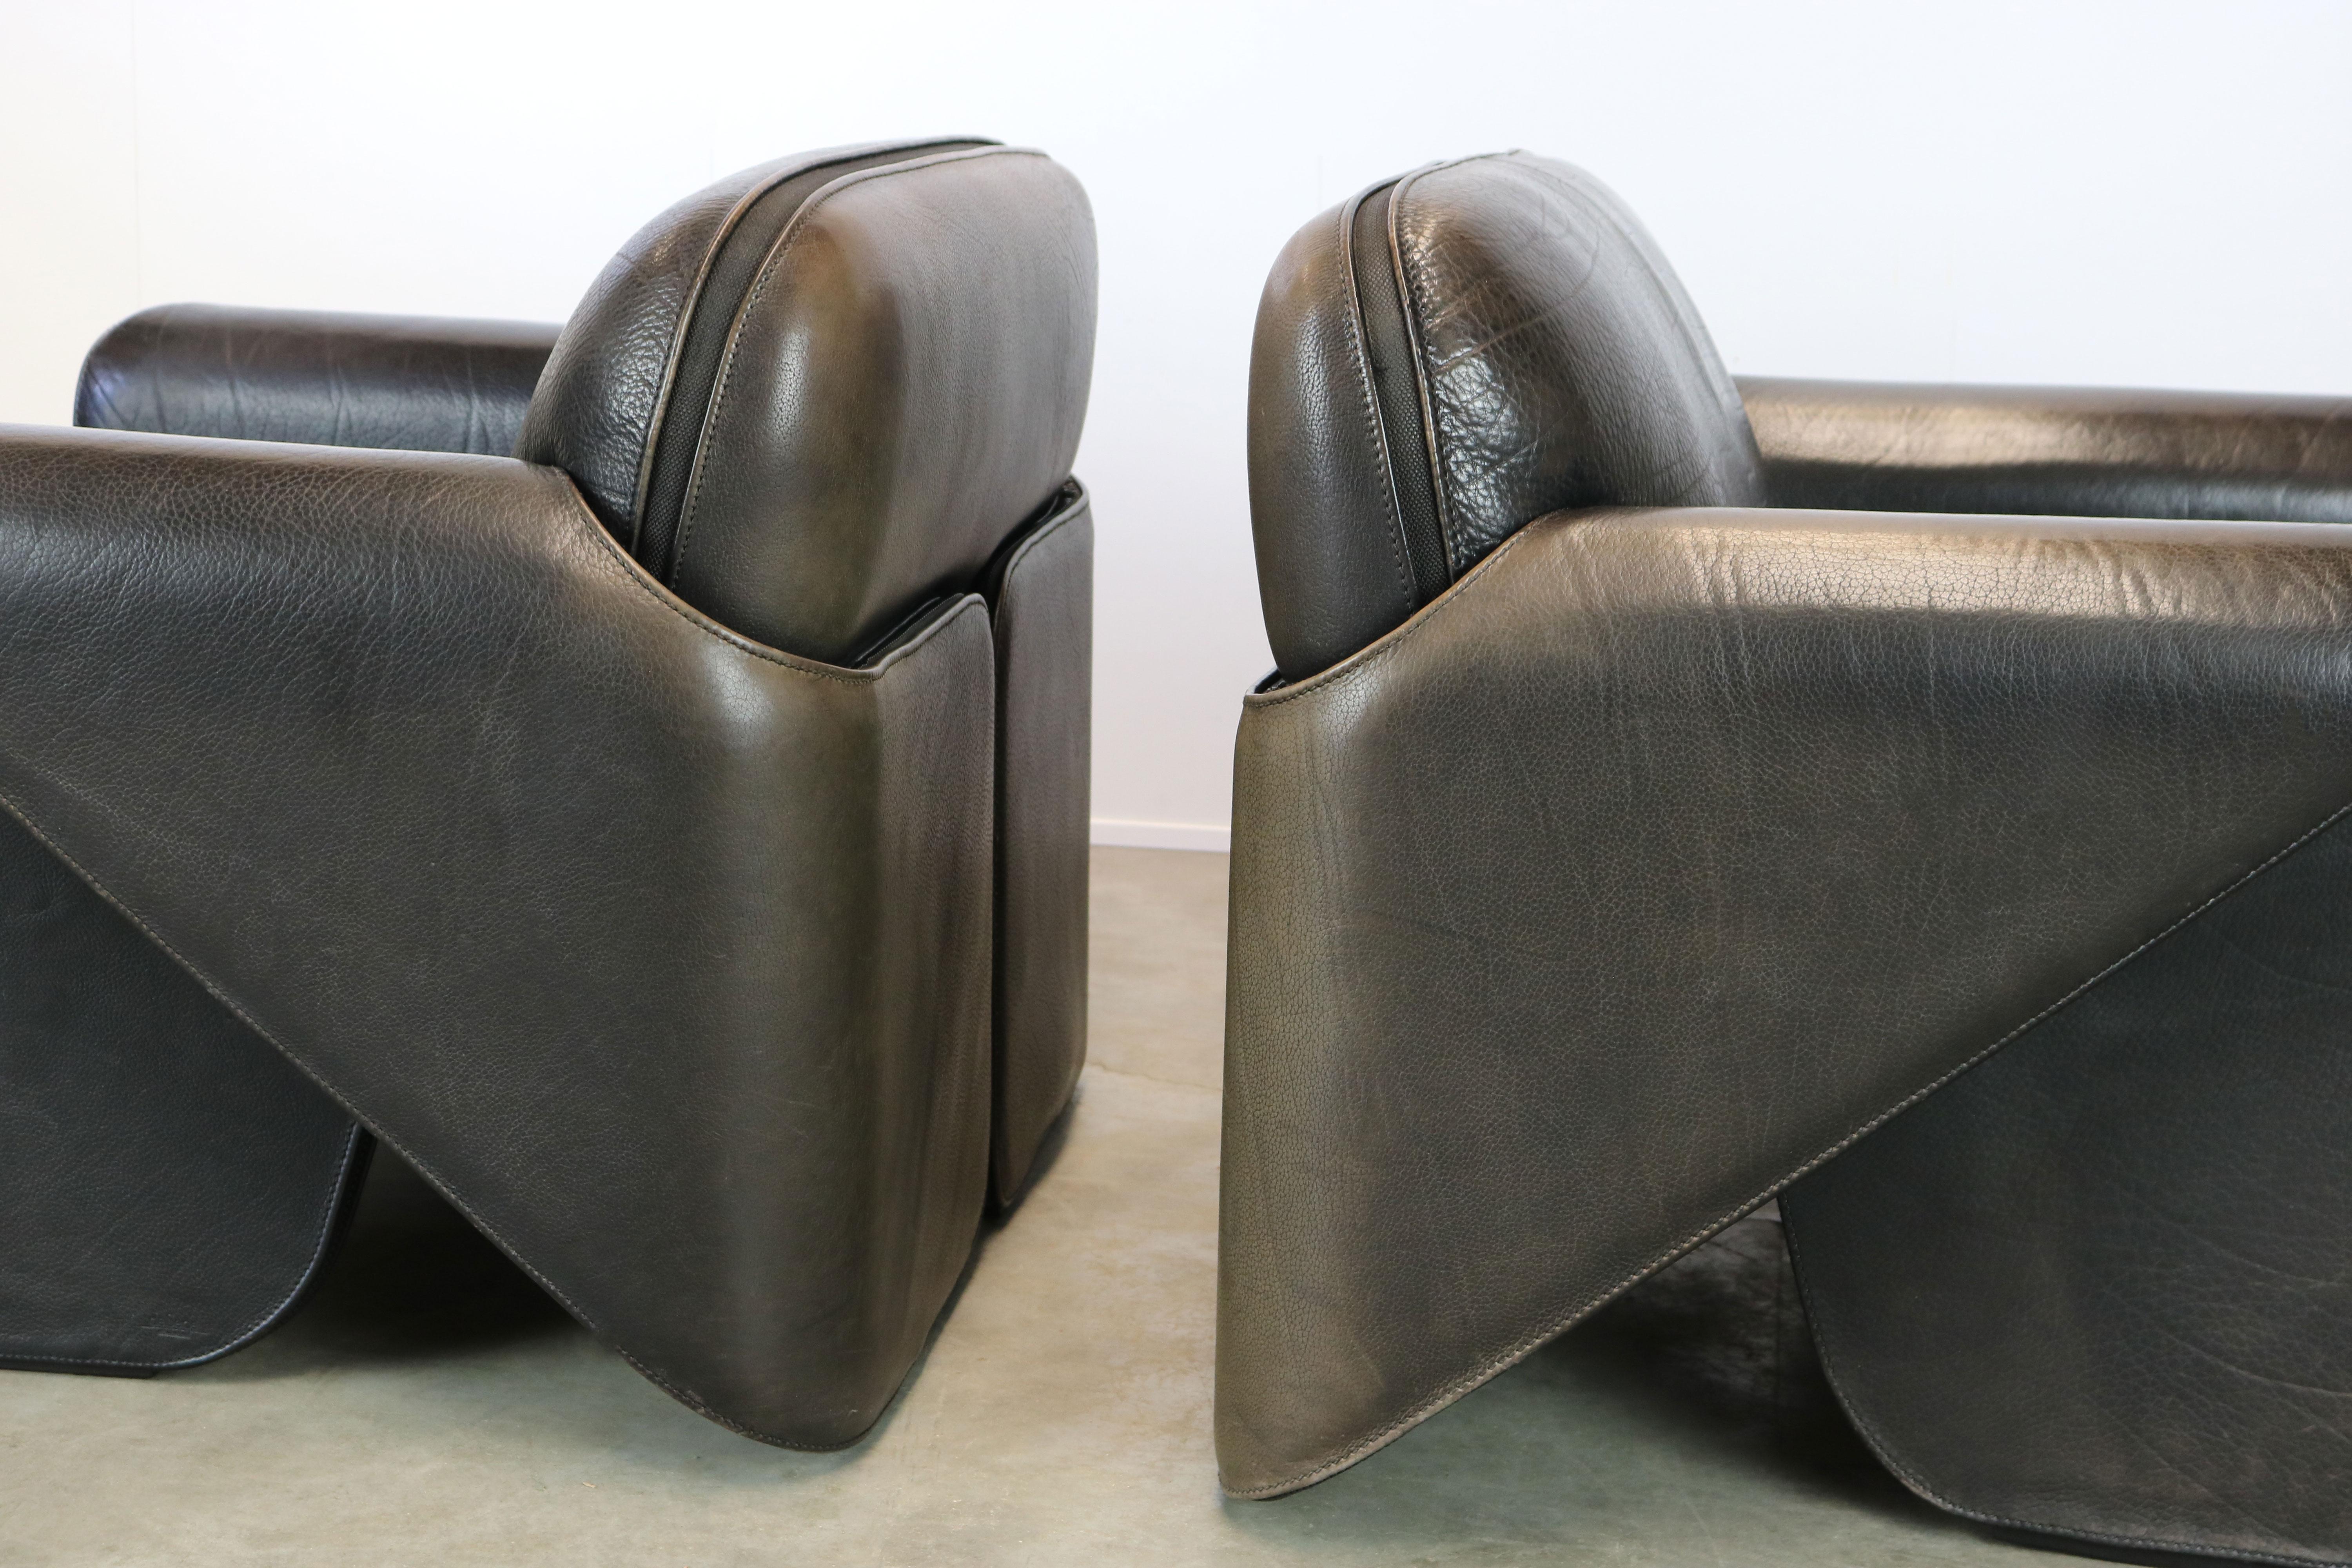 Rare Pair of Swiss De Sede Ds 125 Lounge Chairs by Gerd Lange 1978 Black Leather 7